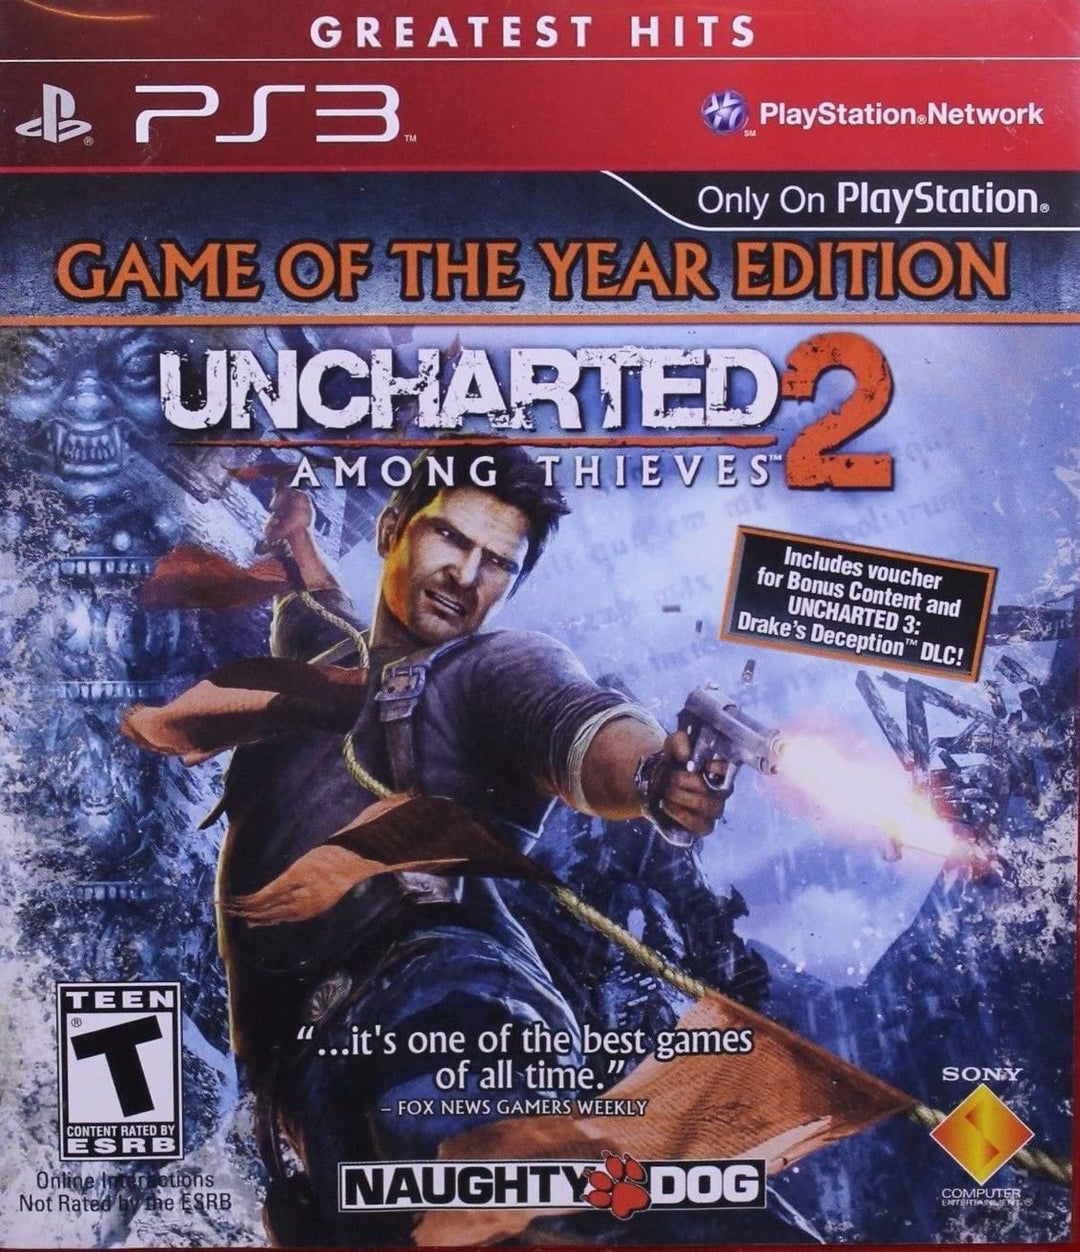 UNCHARTED 2: Among Thieves - Game of The Year Edition - Playstation 3[a popular [low-priced] edition] [?????]